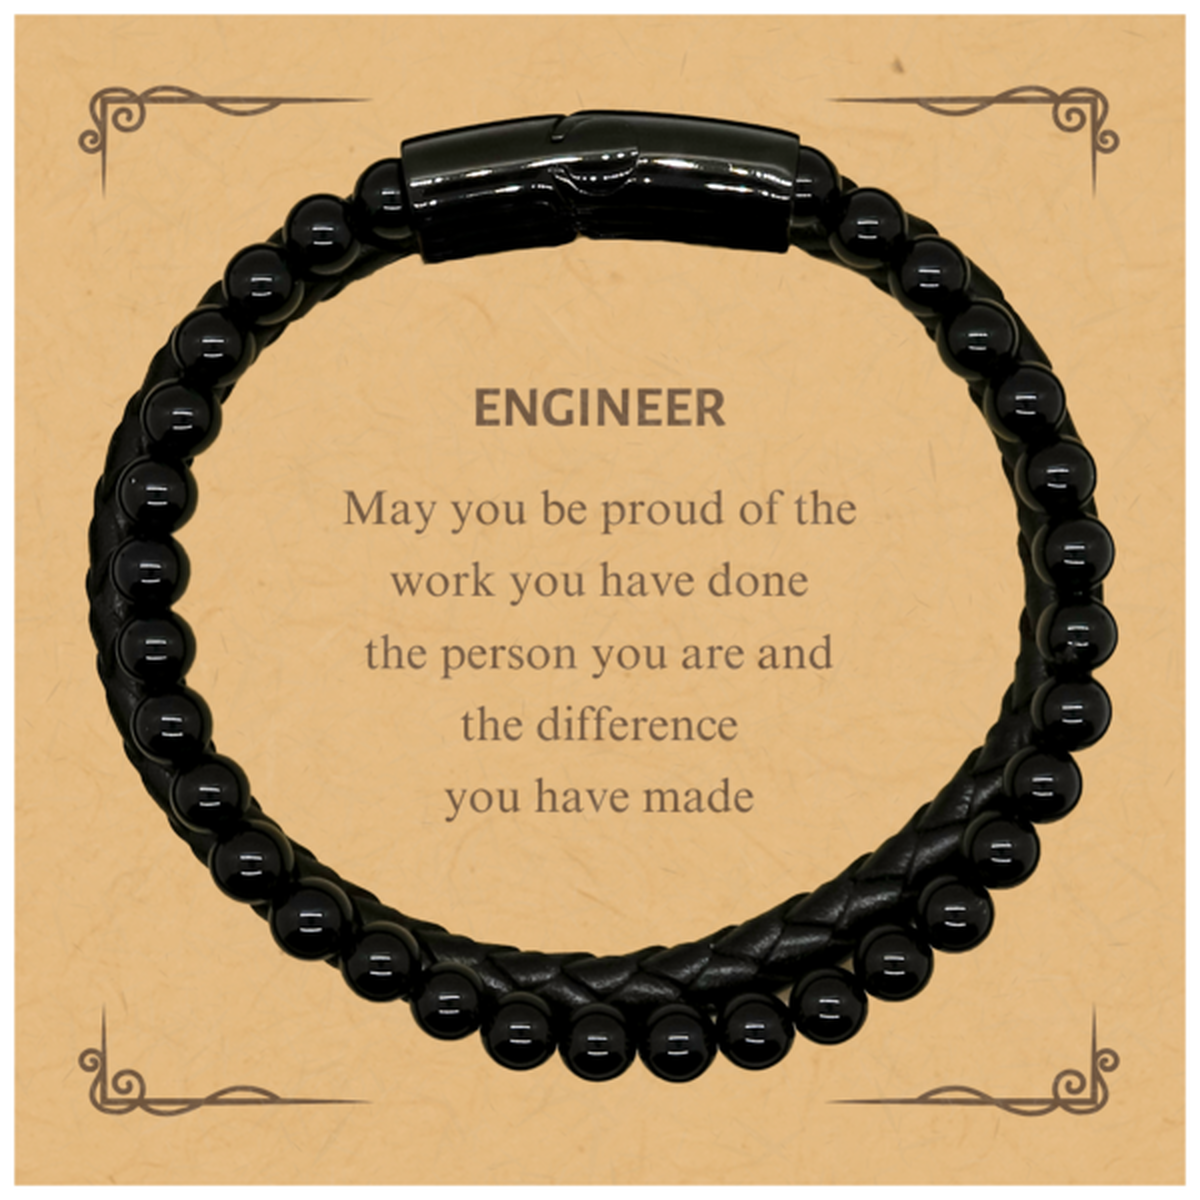 Engineer May you be proud of the work you have done, Retirement Engineer Stone Leather Bracelets for Colleague Appreciation Gifts Amazing for Engineer